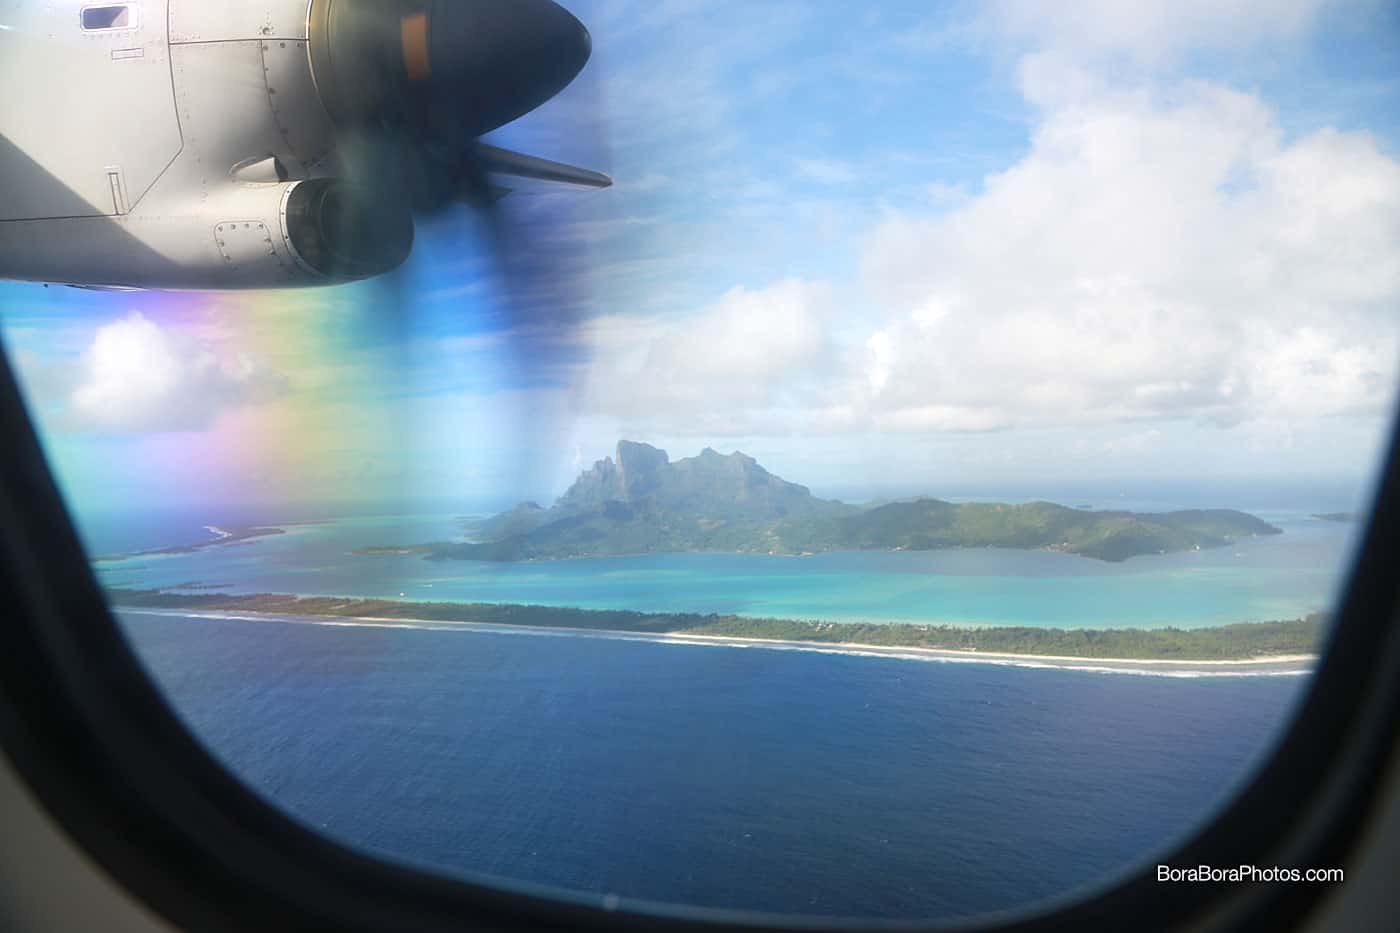 Looking out the window of an airplane and seeing Bora Bora island 